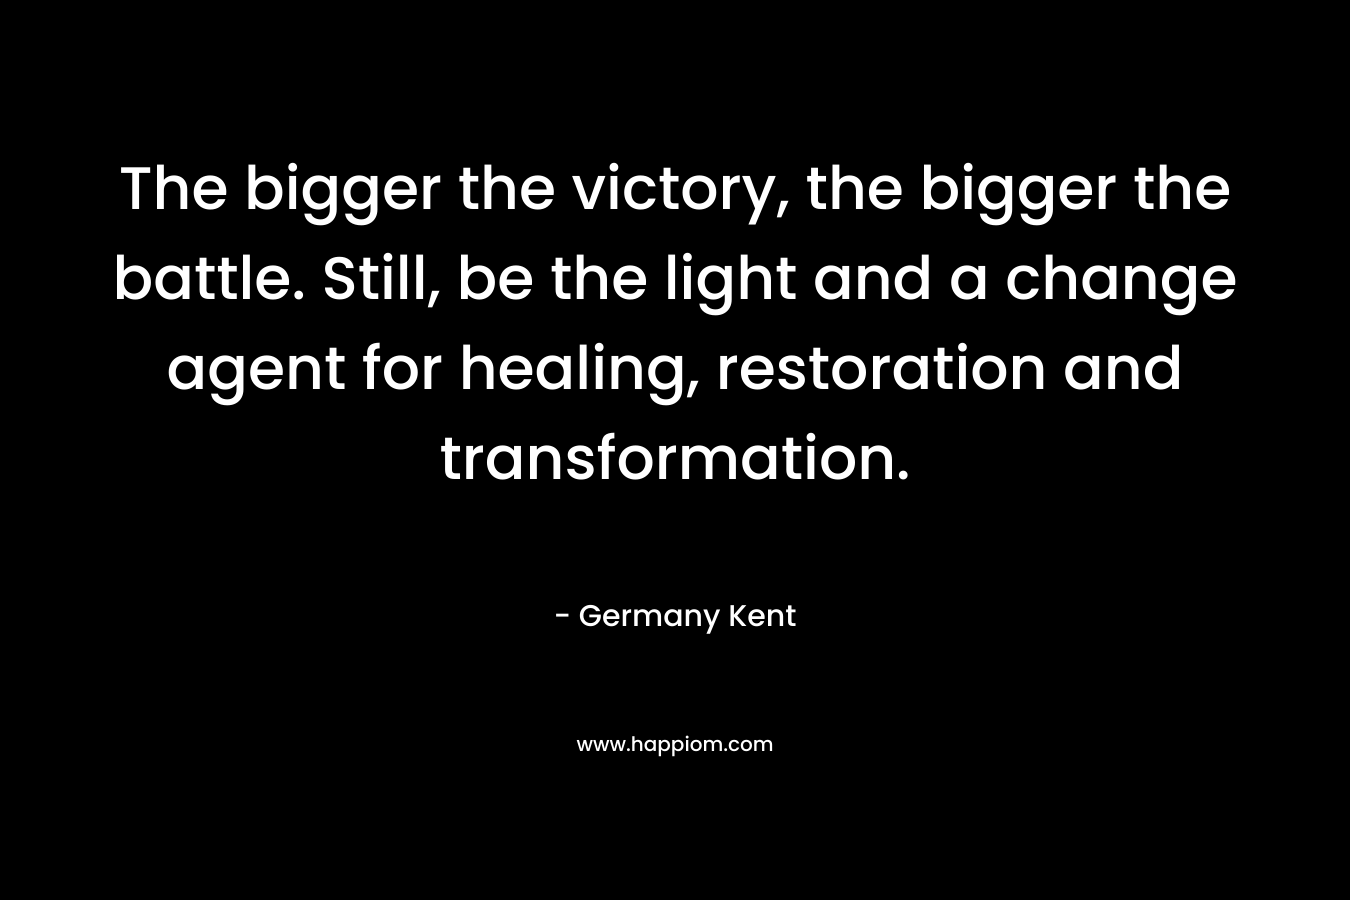 The bigger the victory, the bigger the battle. Still, be the light and a change agent for healing, restoration and transformation.